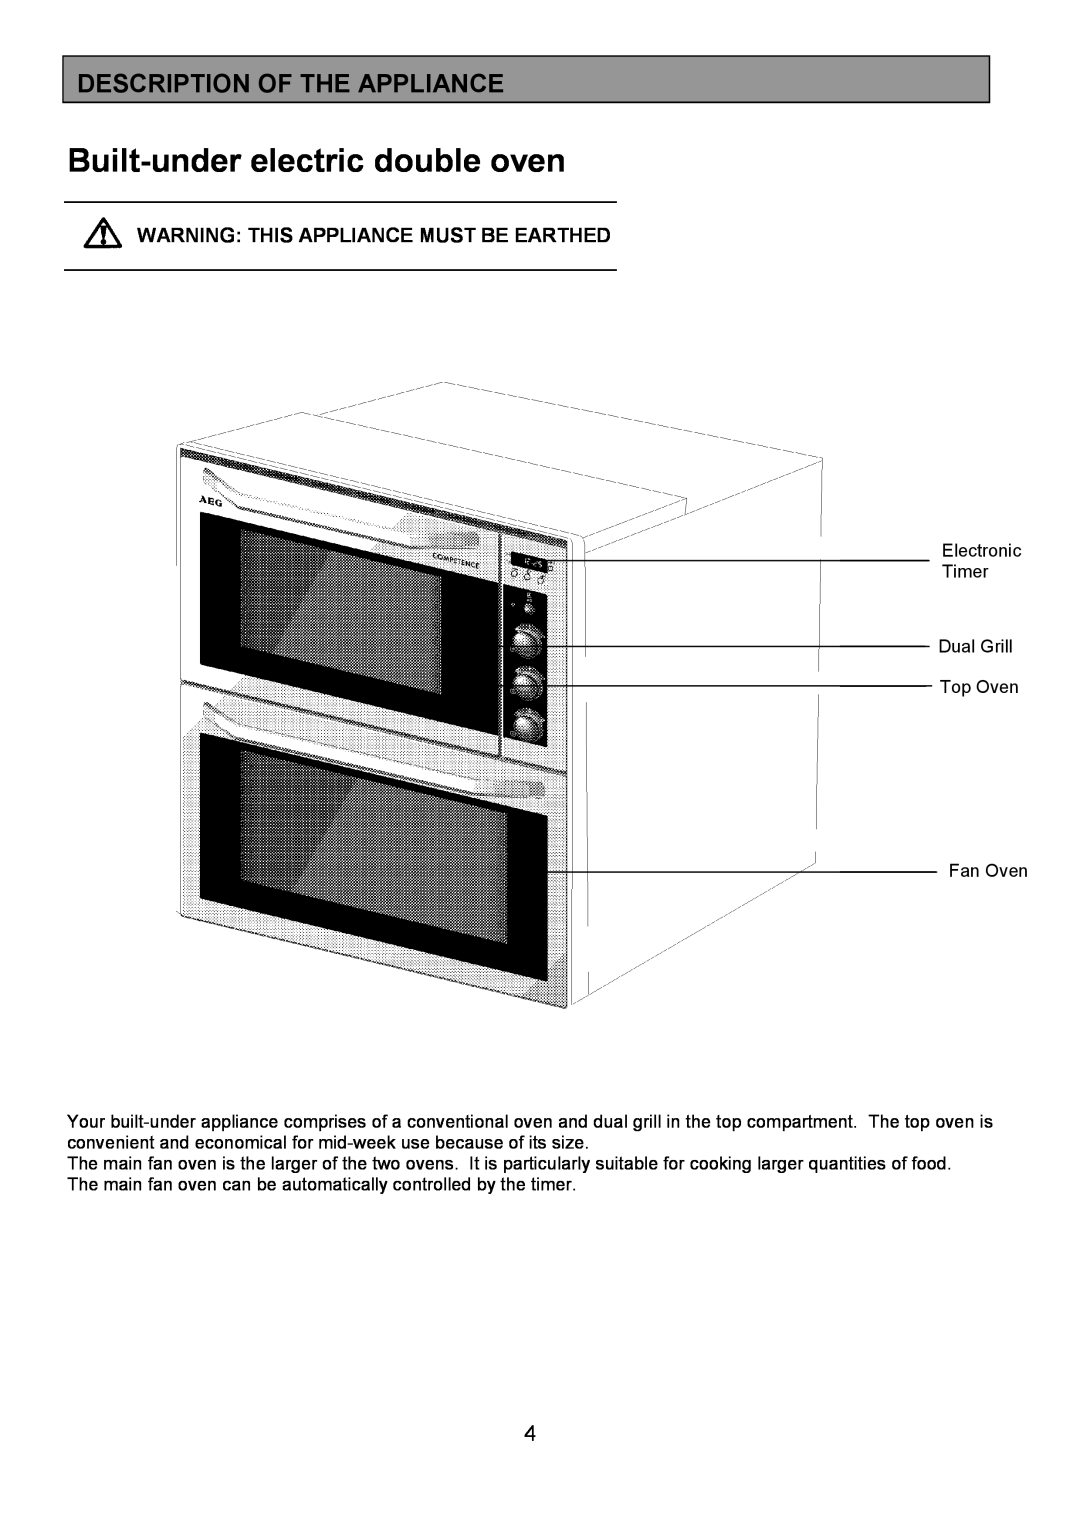 AEG 3210 BU Built-under electric double oven, Description Of The Appliance, Warning This Appliance Must Be Earthed 